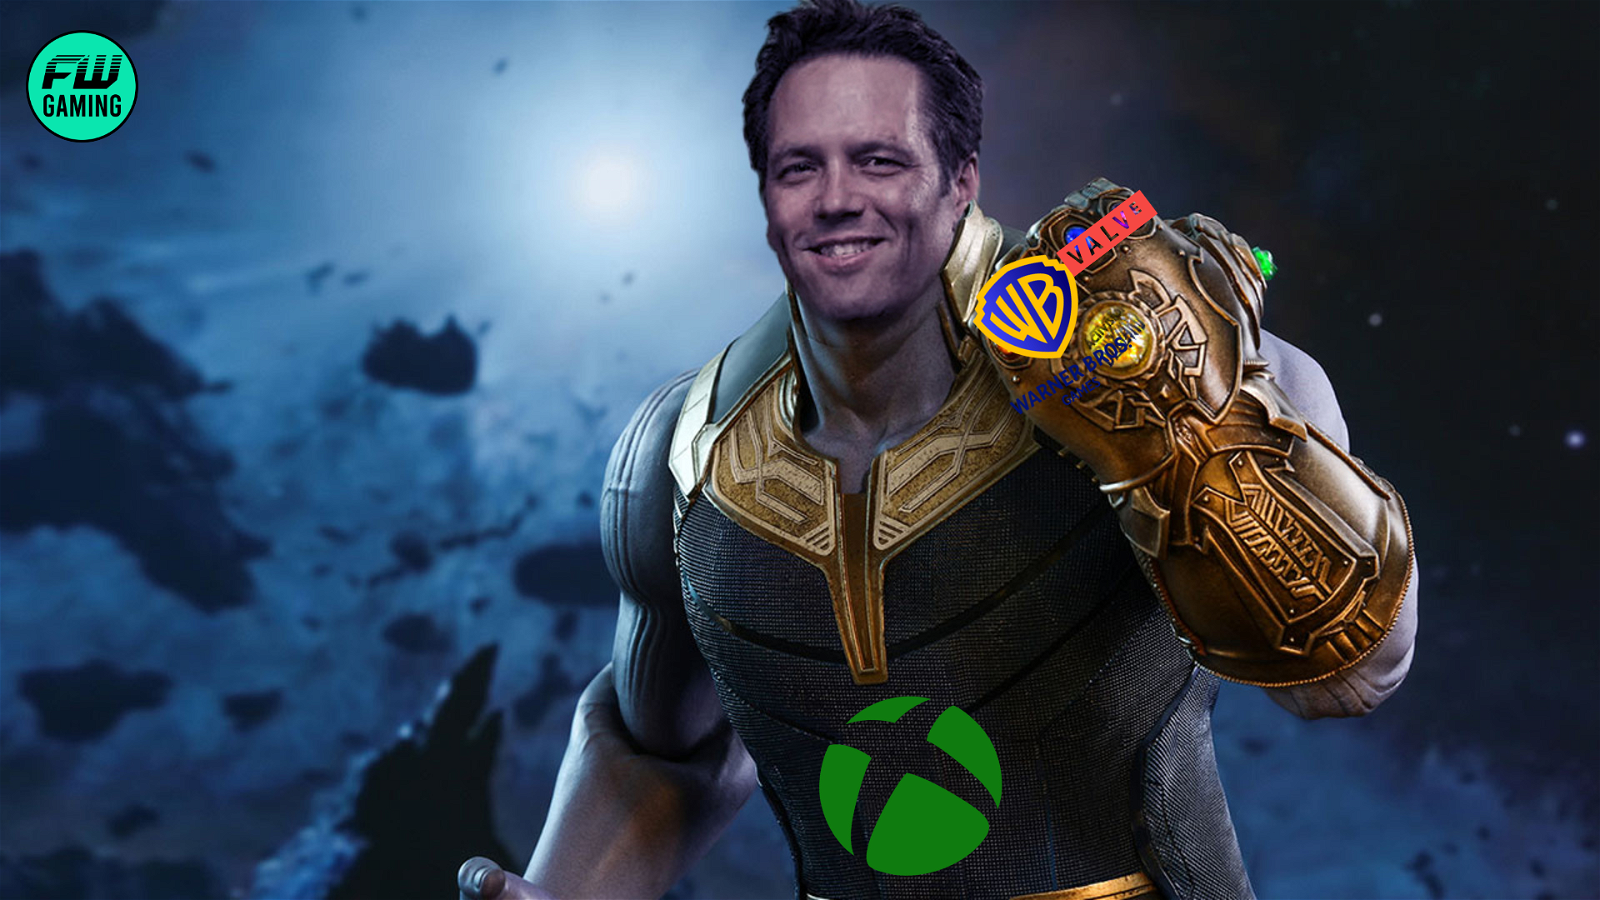 Xbox CEO Phil Spencer Has Eyes on Warner Bros. and Valve